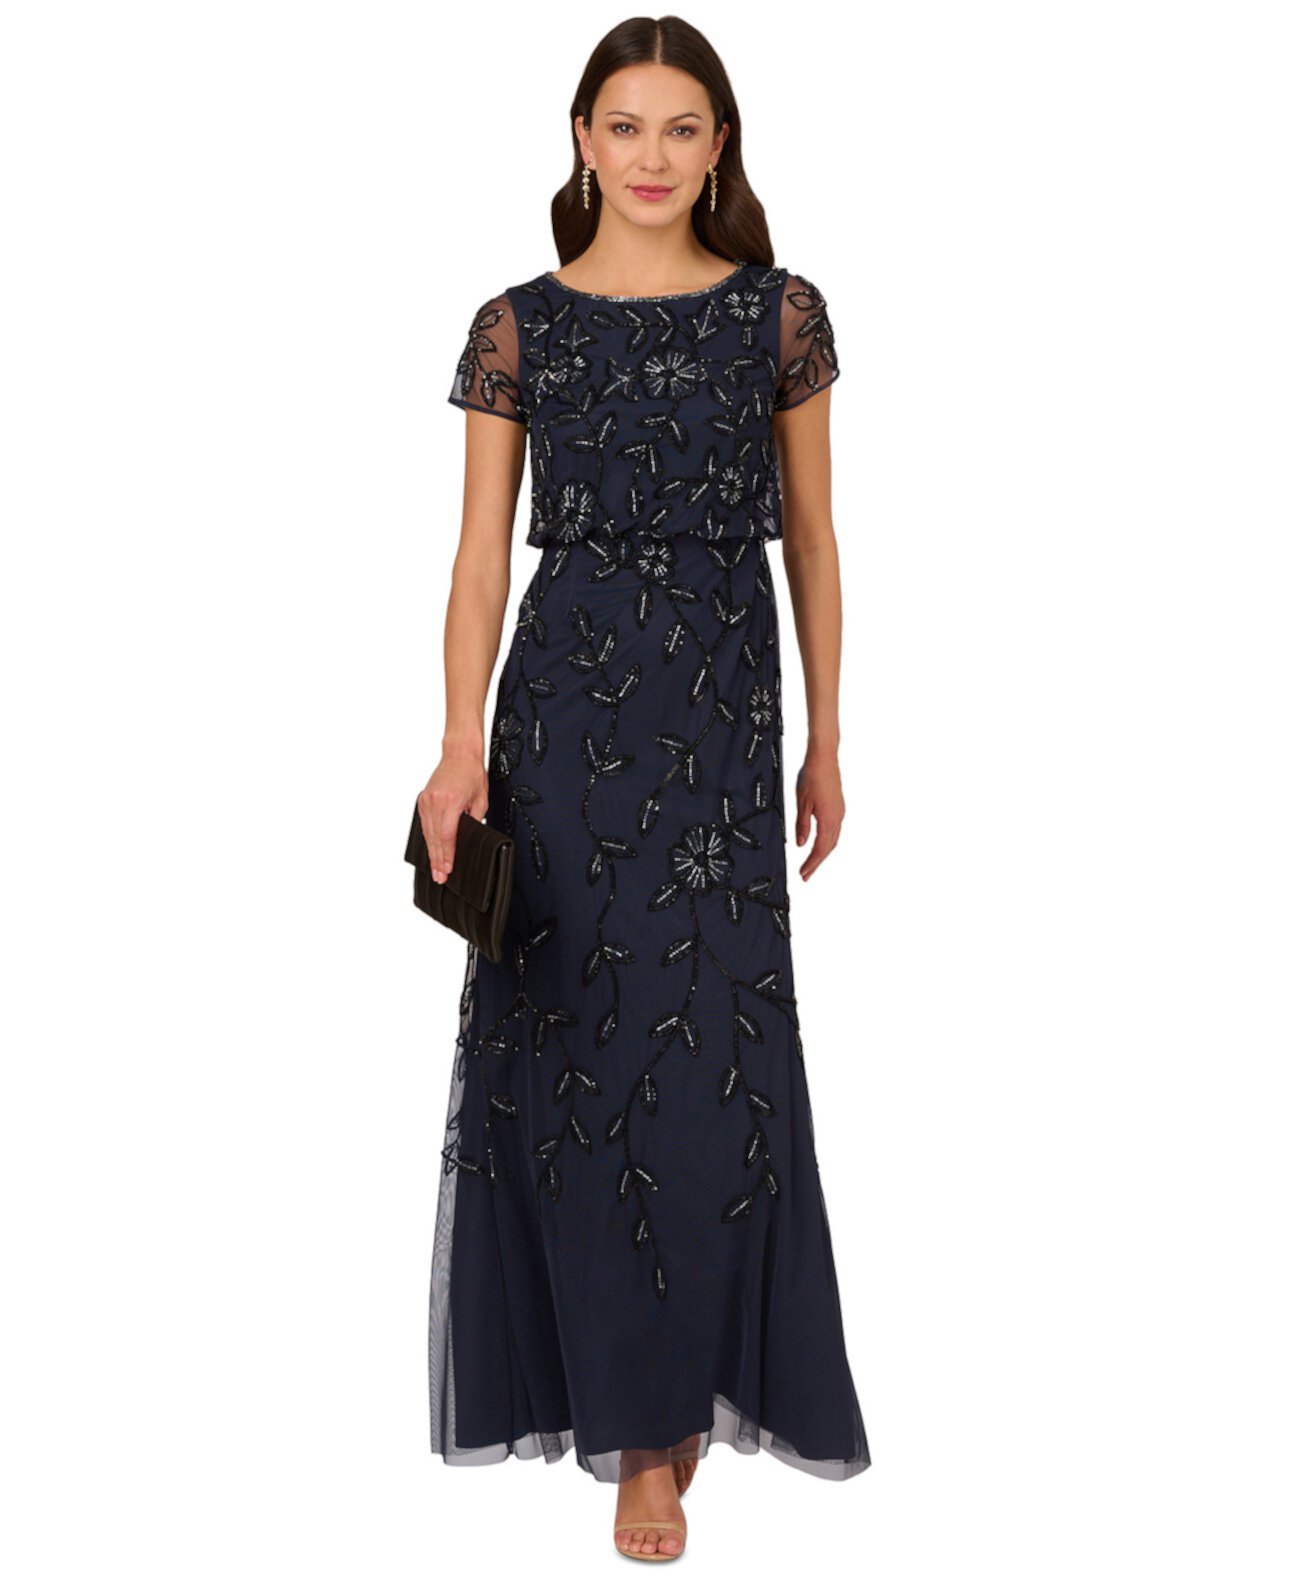 Women's Floral Bead Embellished Blouson Short-Sleeve Gown Adrianna Papell